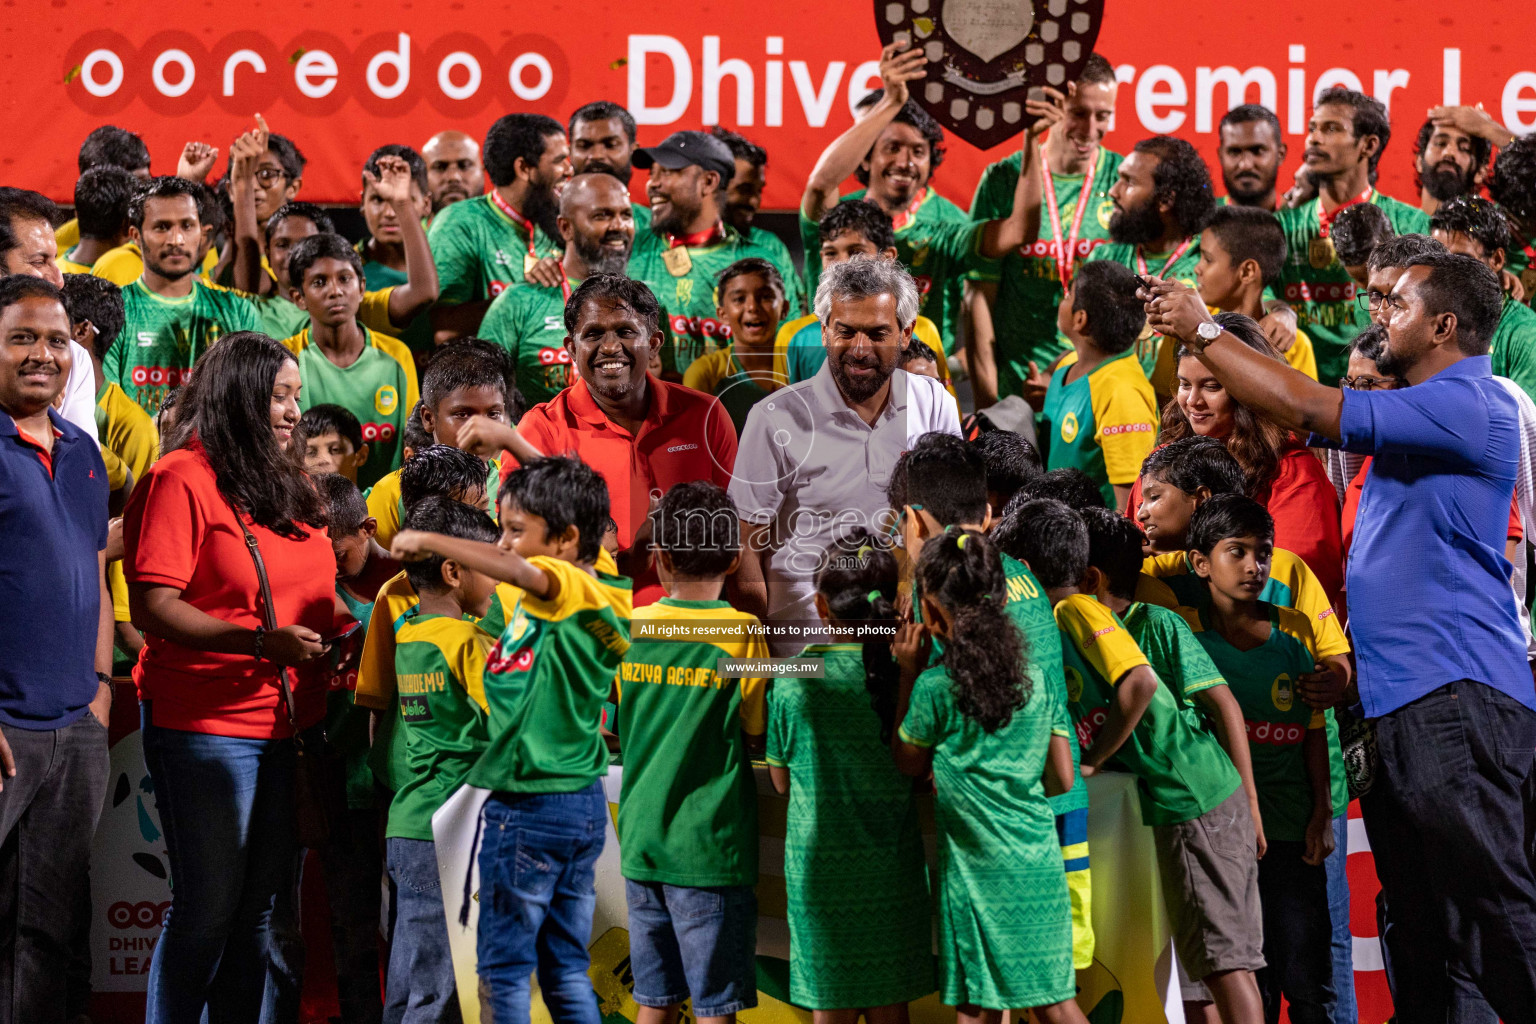 Maziya SR vs Club Eagles in Ooredoo Dhivehi Premier League 2021/22 on 1st Aug 2022, held in National Football Stadium, Male', Maldives Photos: Ismail Thoriq / Images